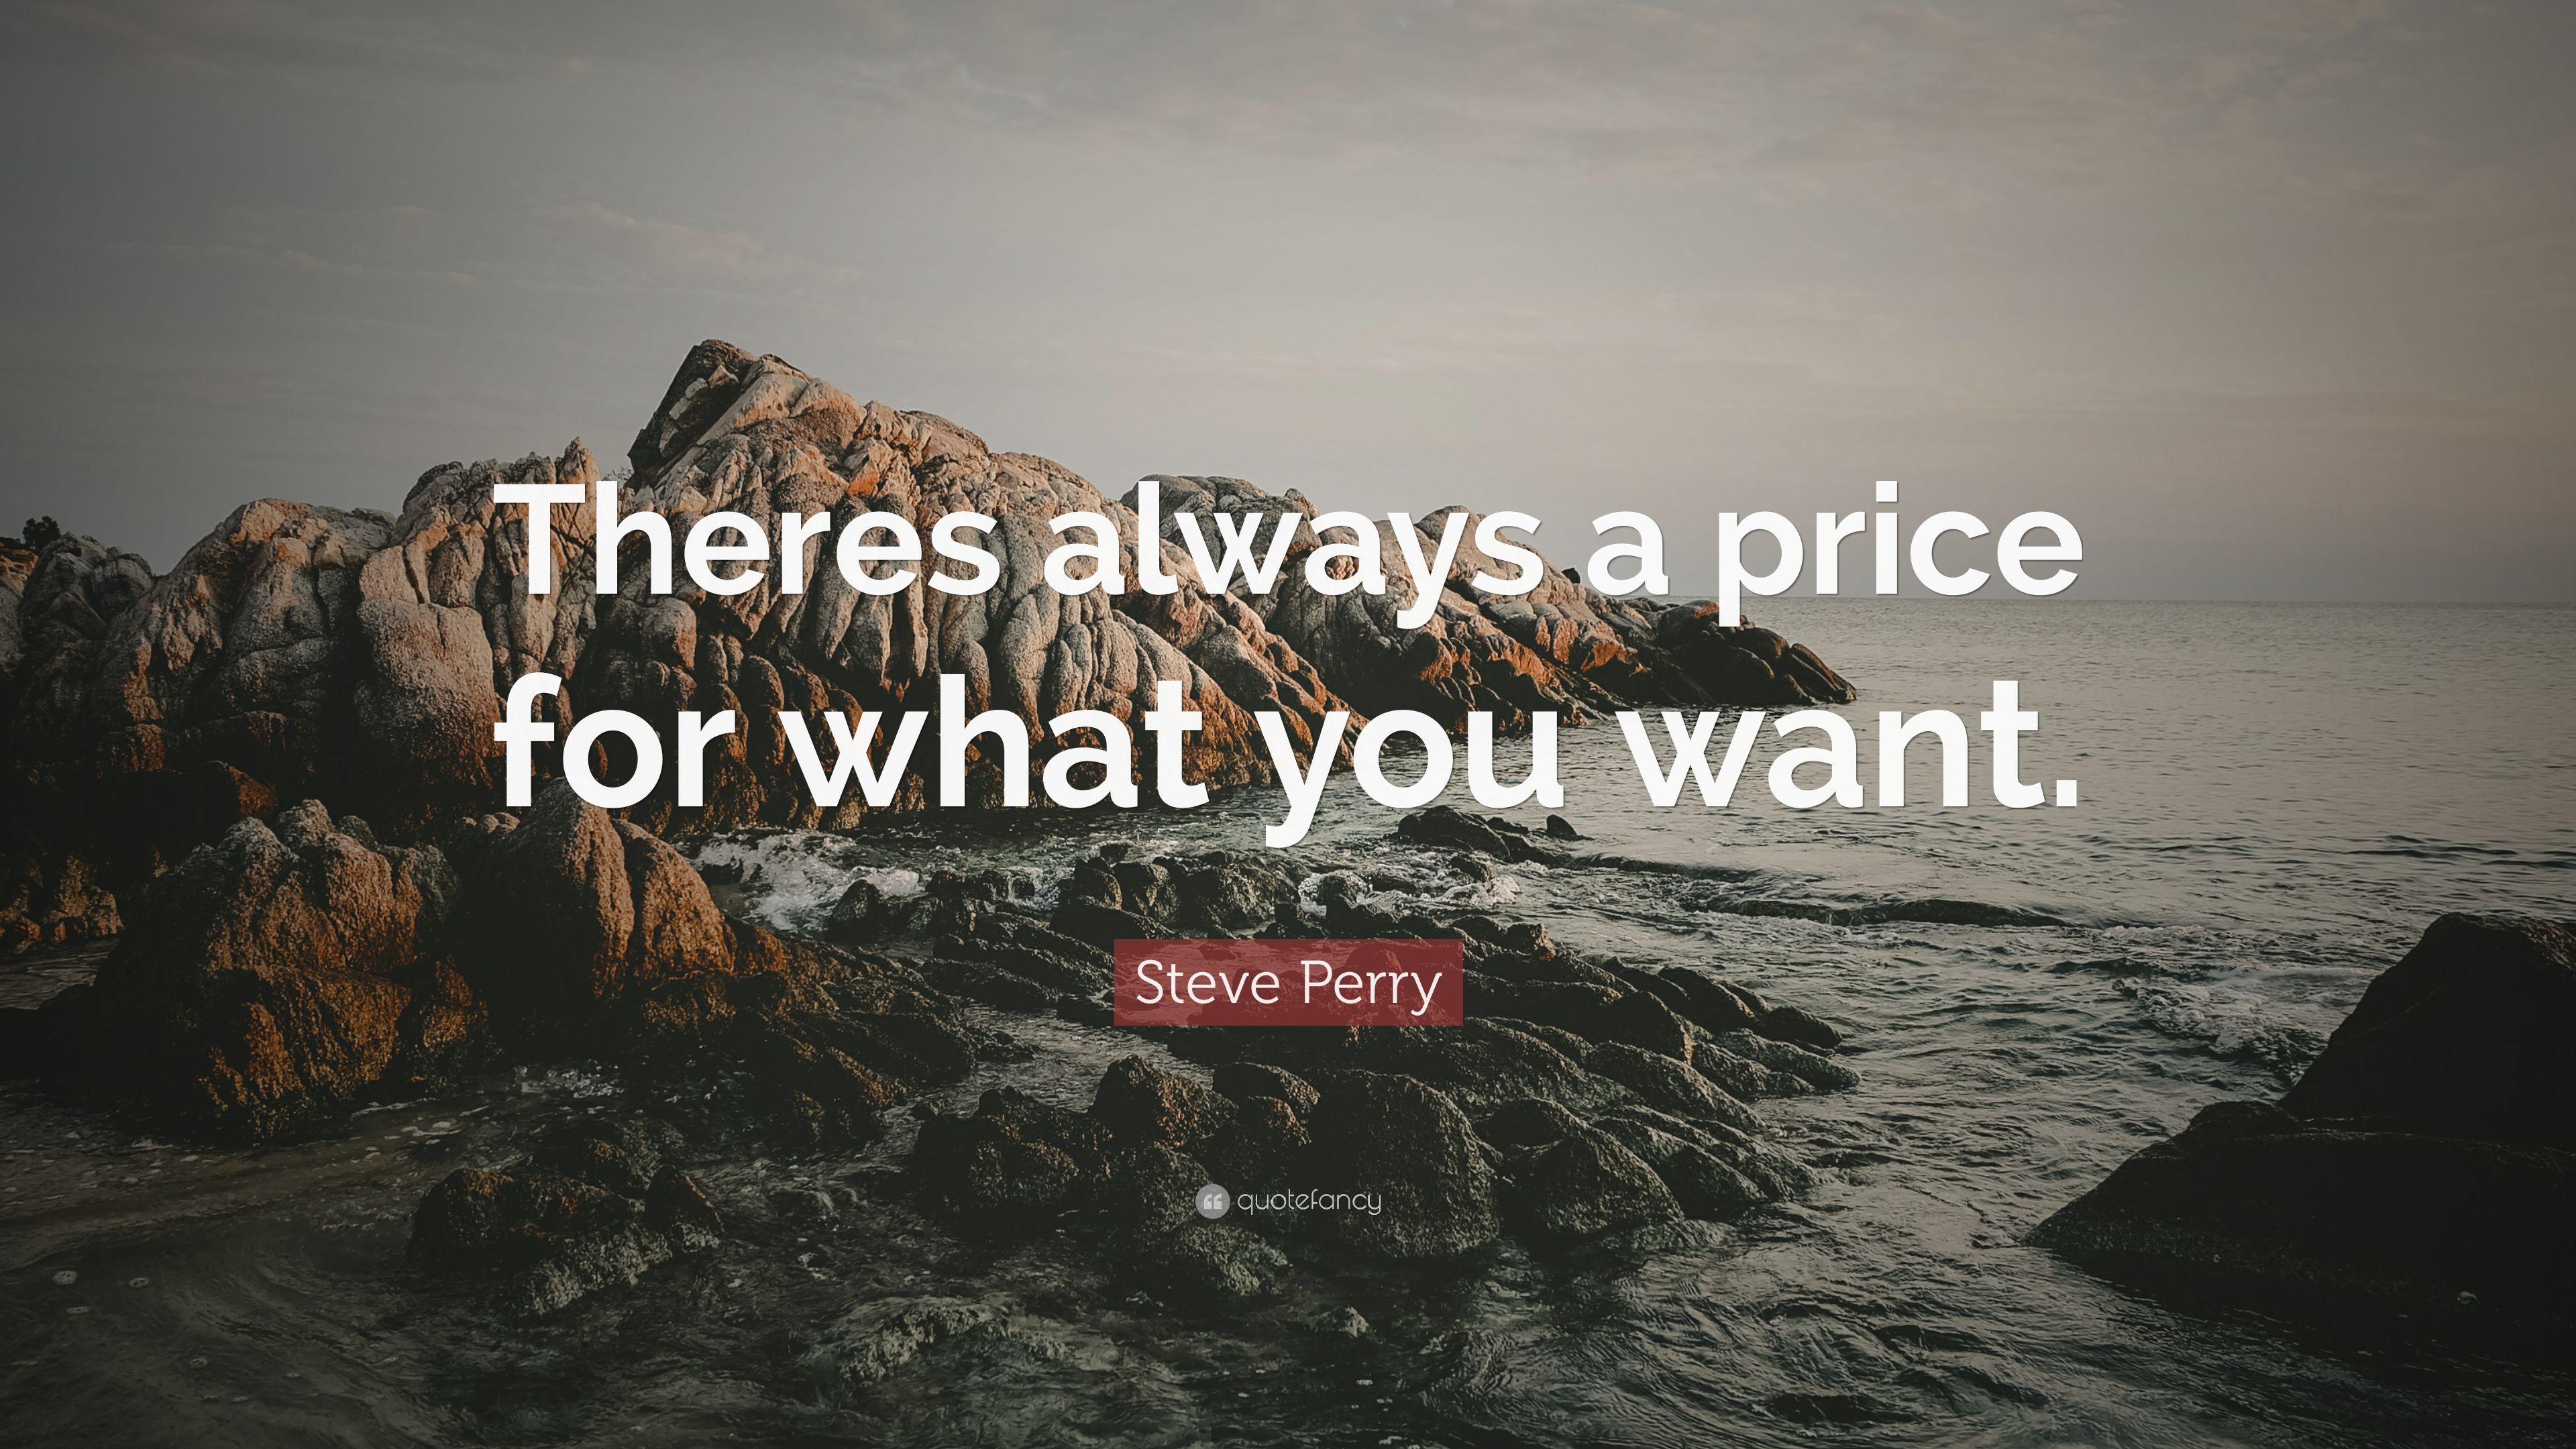 Steve Perry Quote: “Theres always a price for what you want.” 7